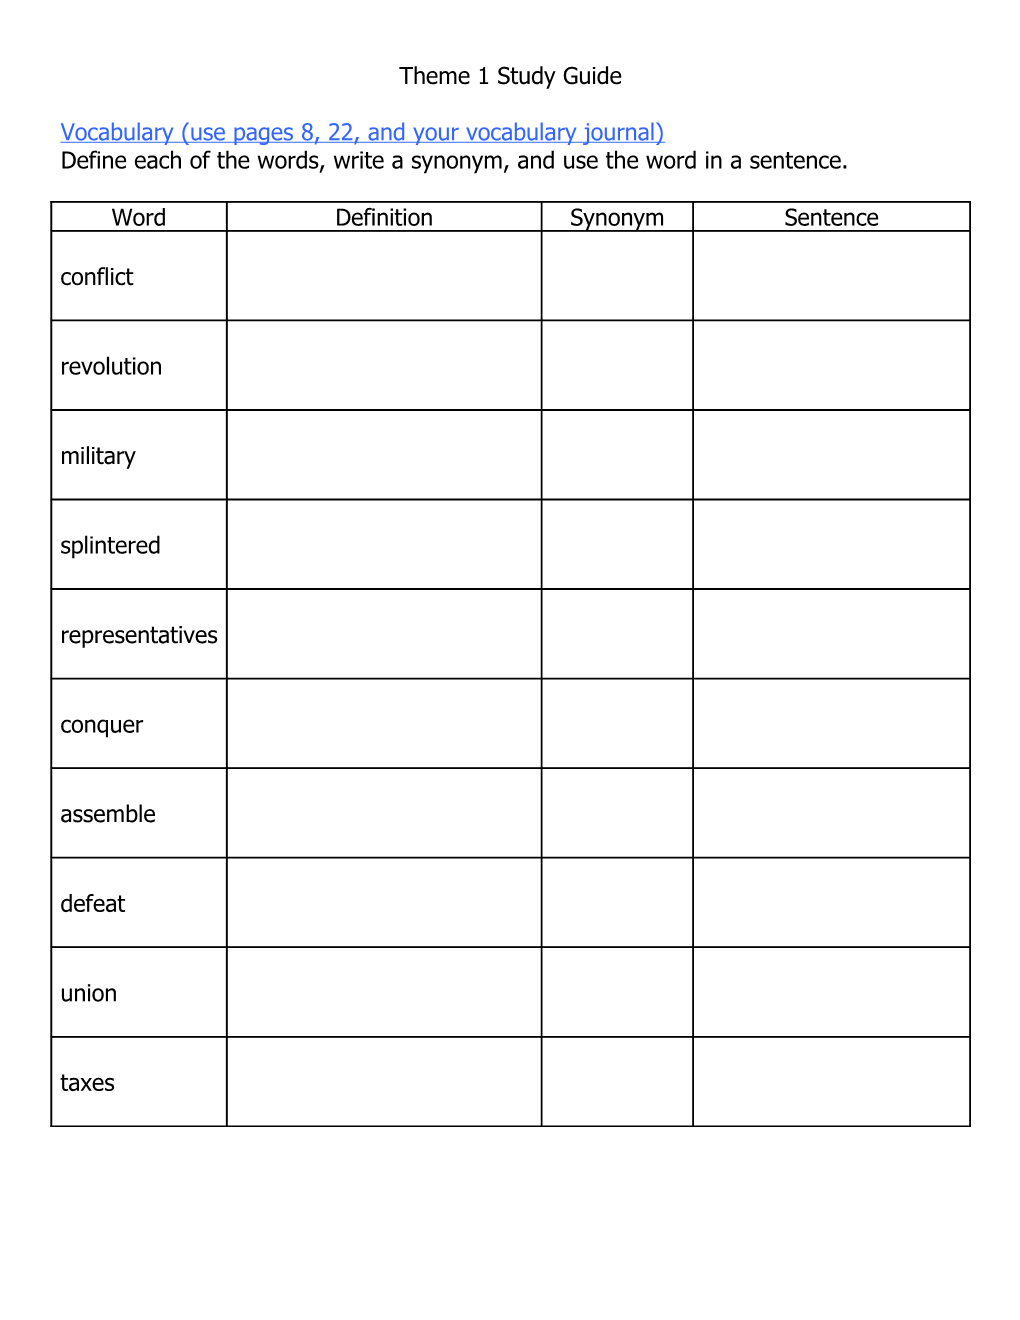 Vocabulary (Use Pages 8, 22, and Your Vocabulary Journal)